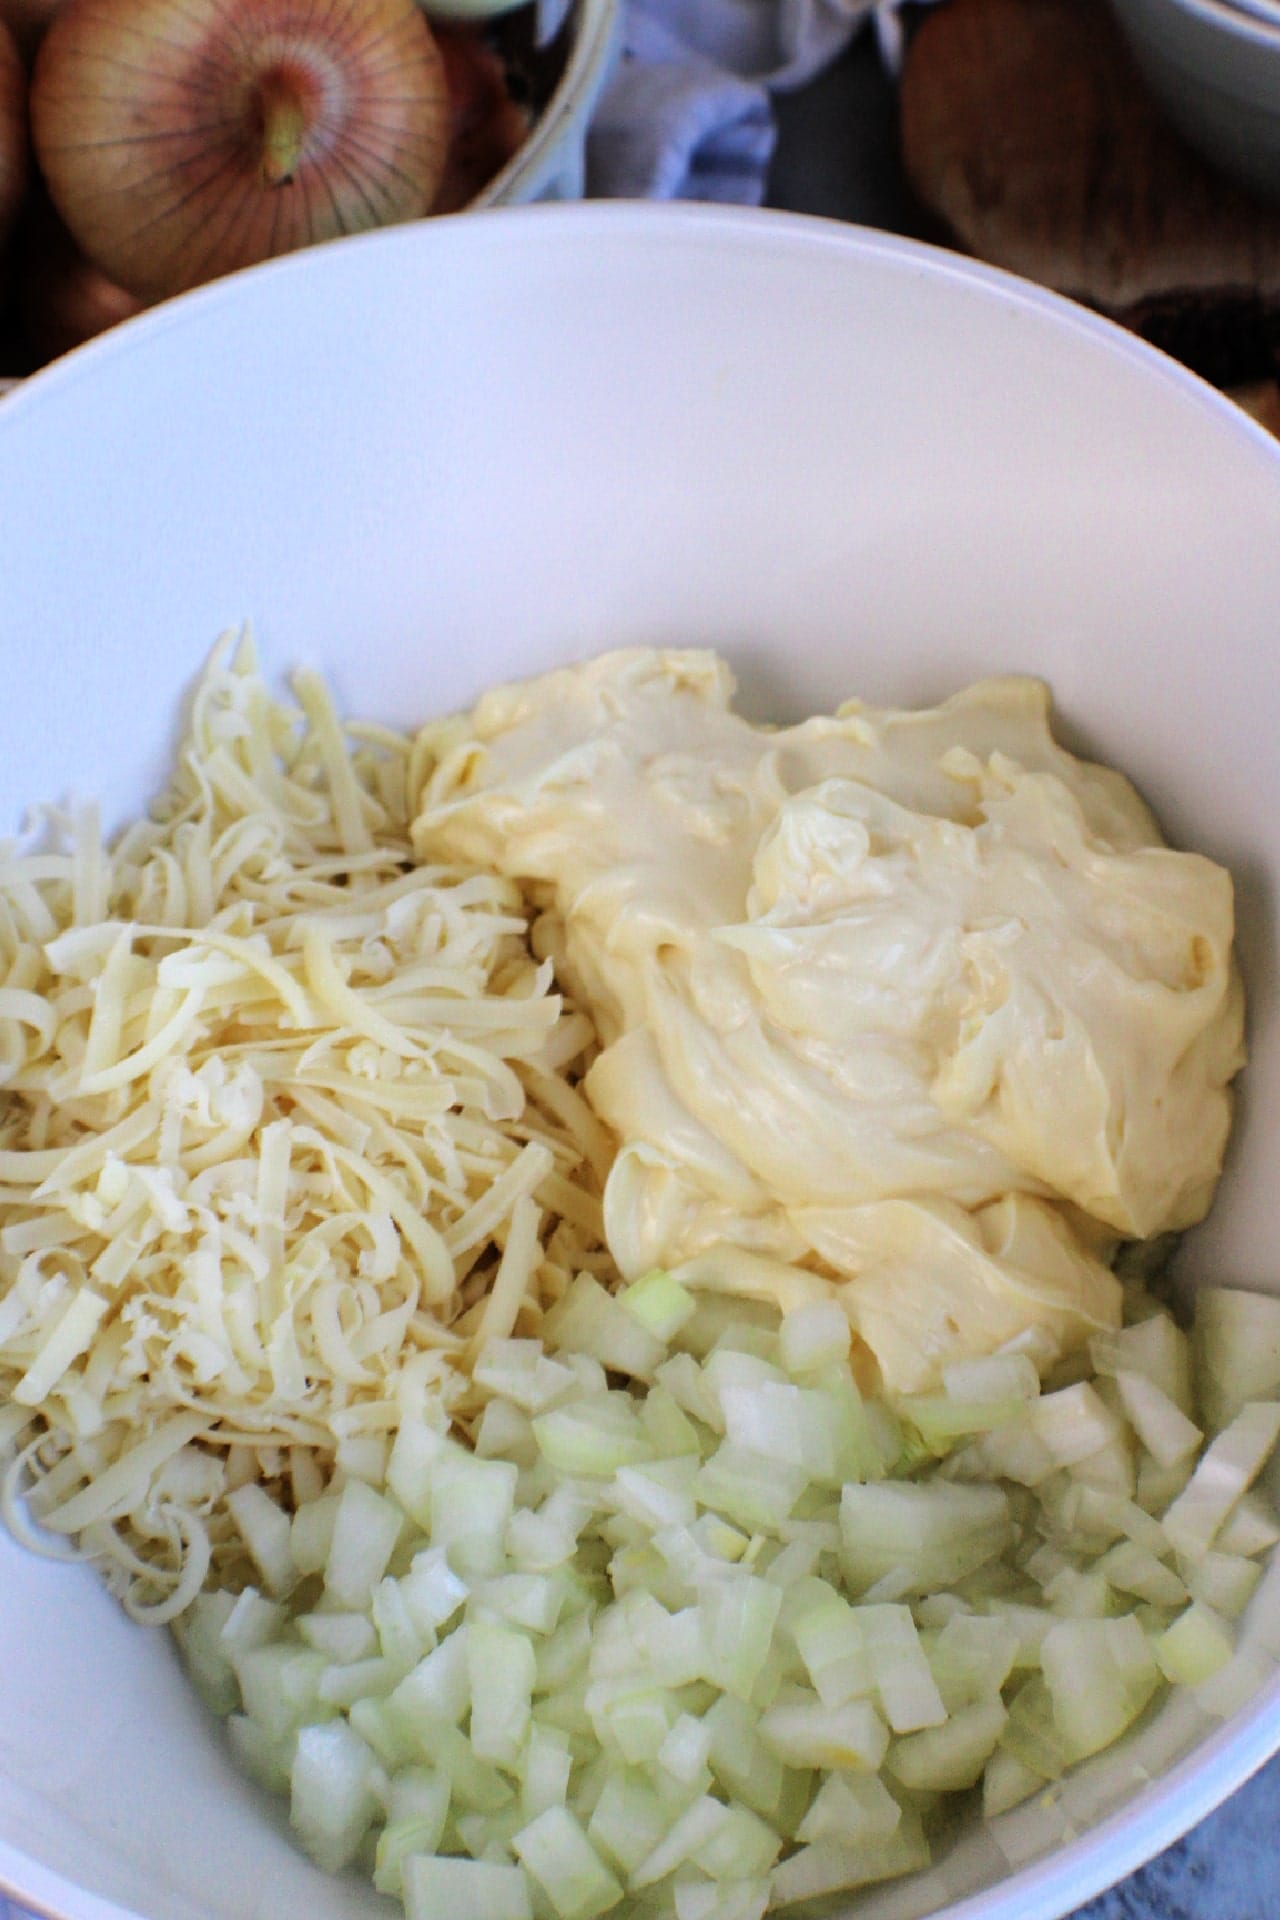 Hot Onion Dip ingredients in a mixing bowl